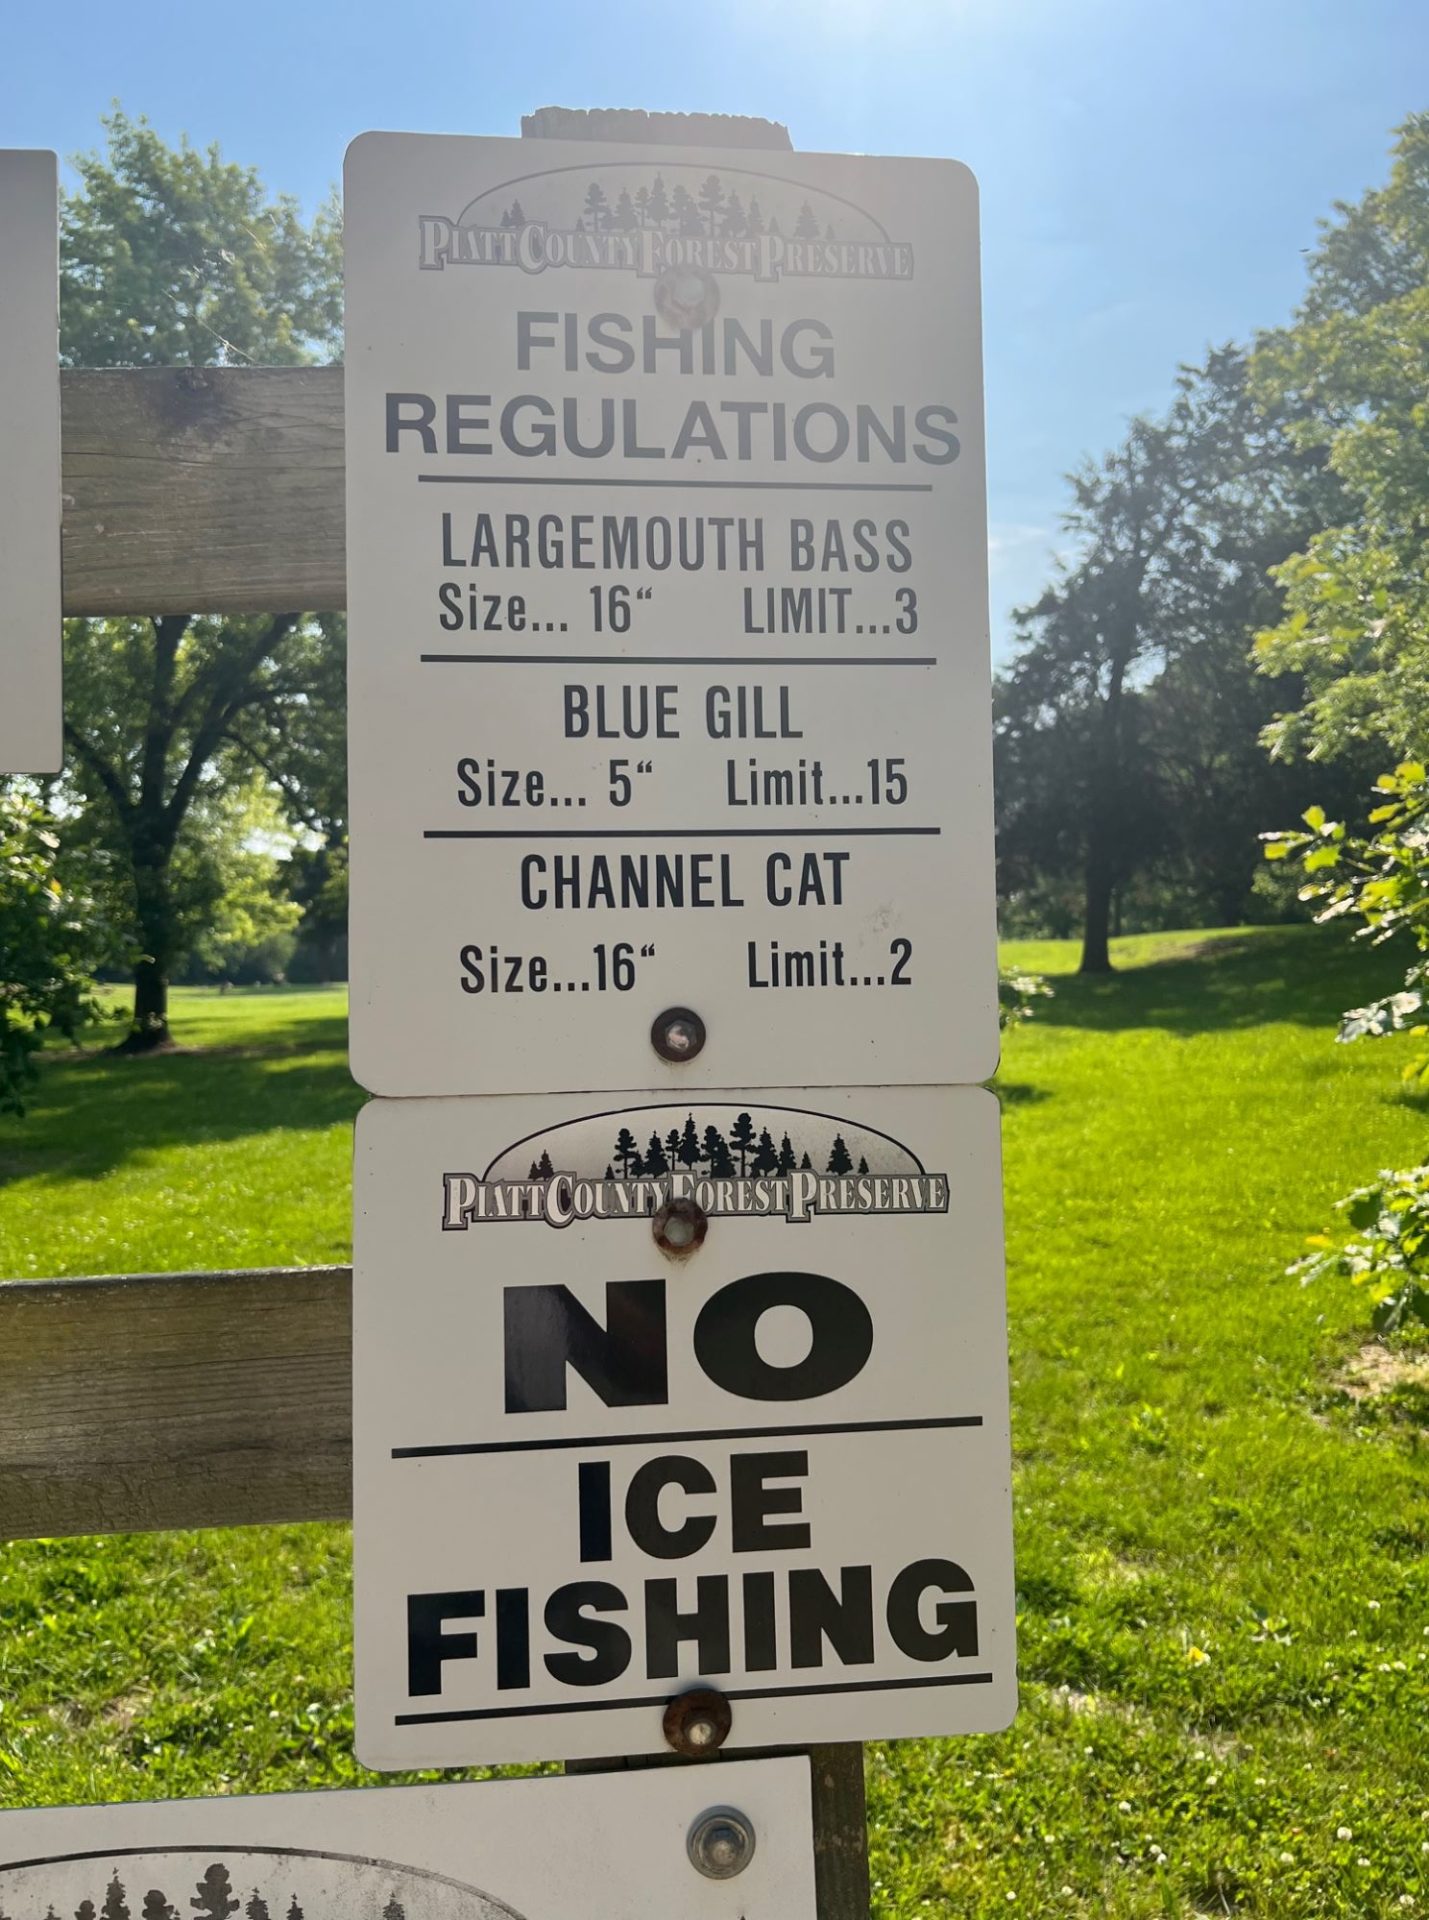 Two white signs with black lettering stacked on top of each other. The top sign lists fishing regulations. The bottom sign says NO ICE FISHING in black block letters.